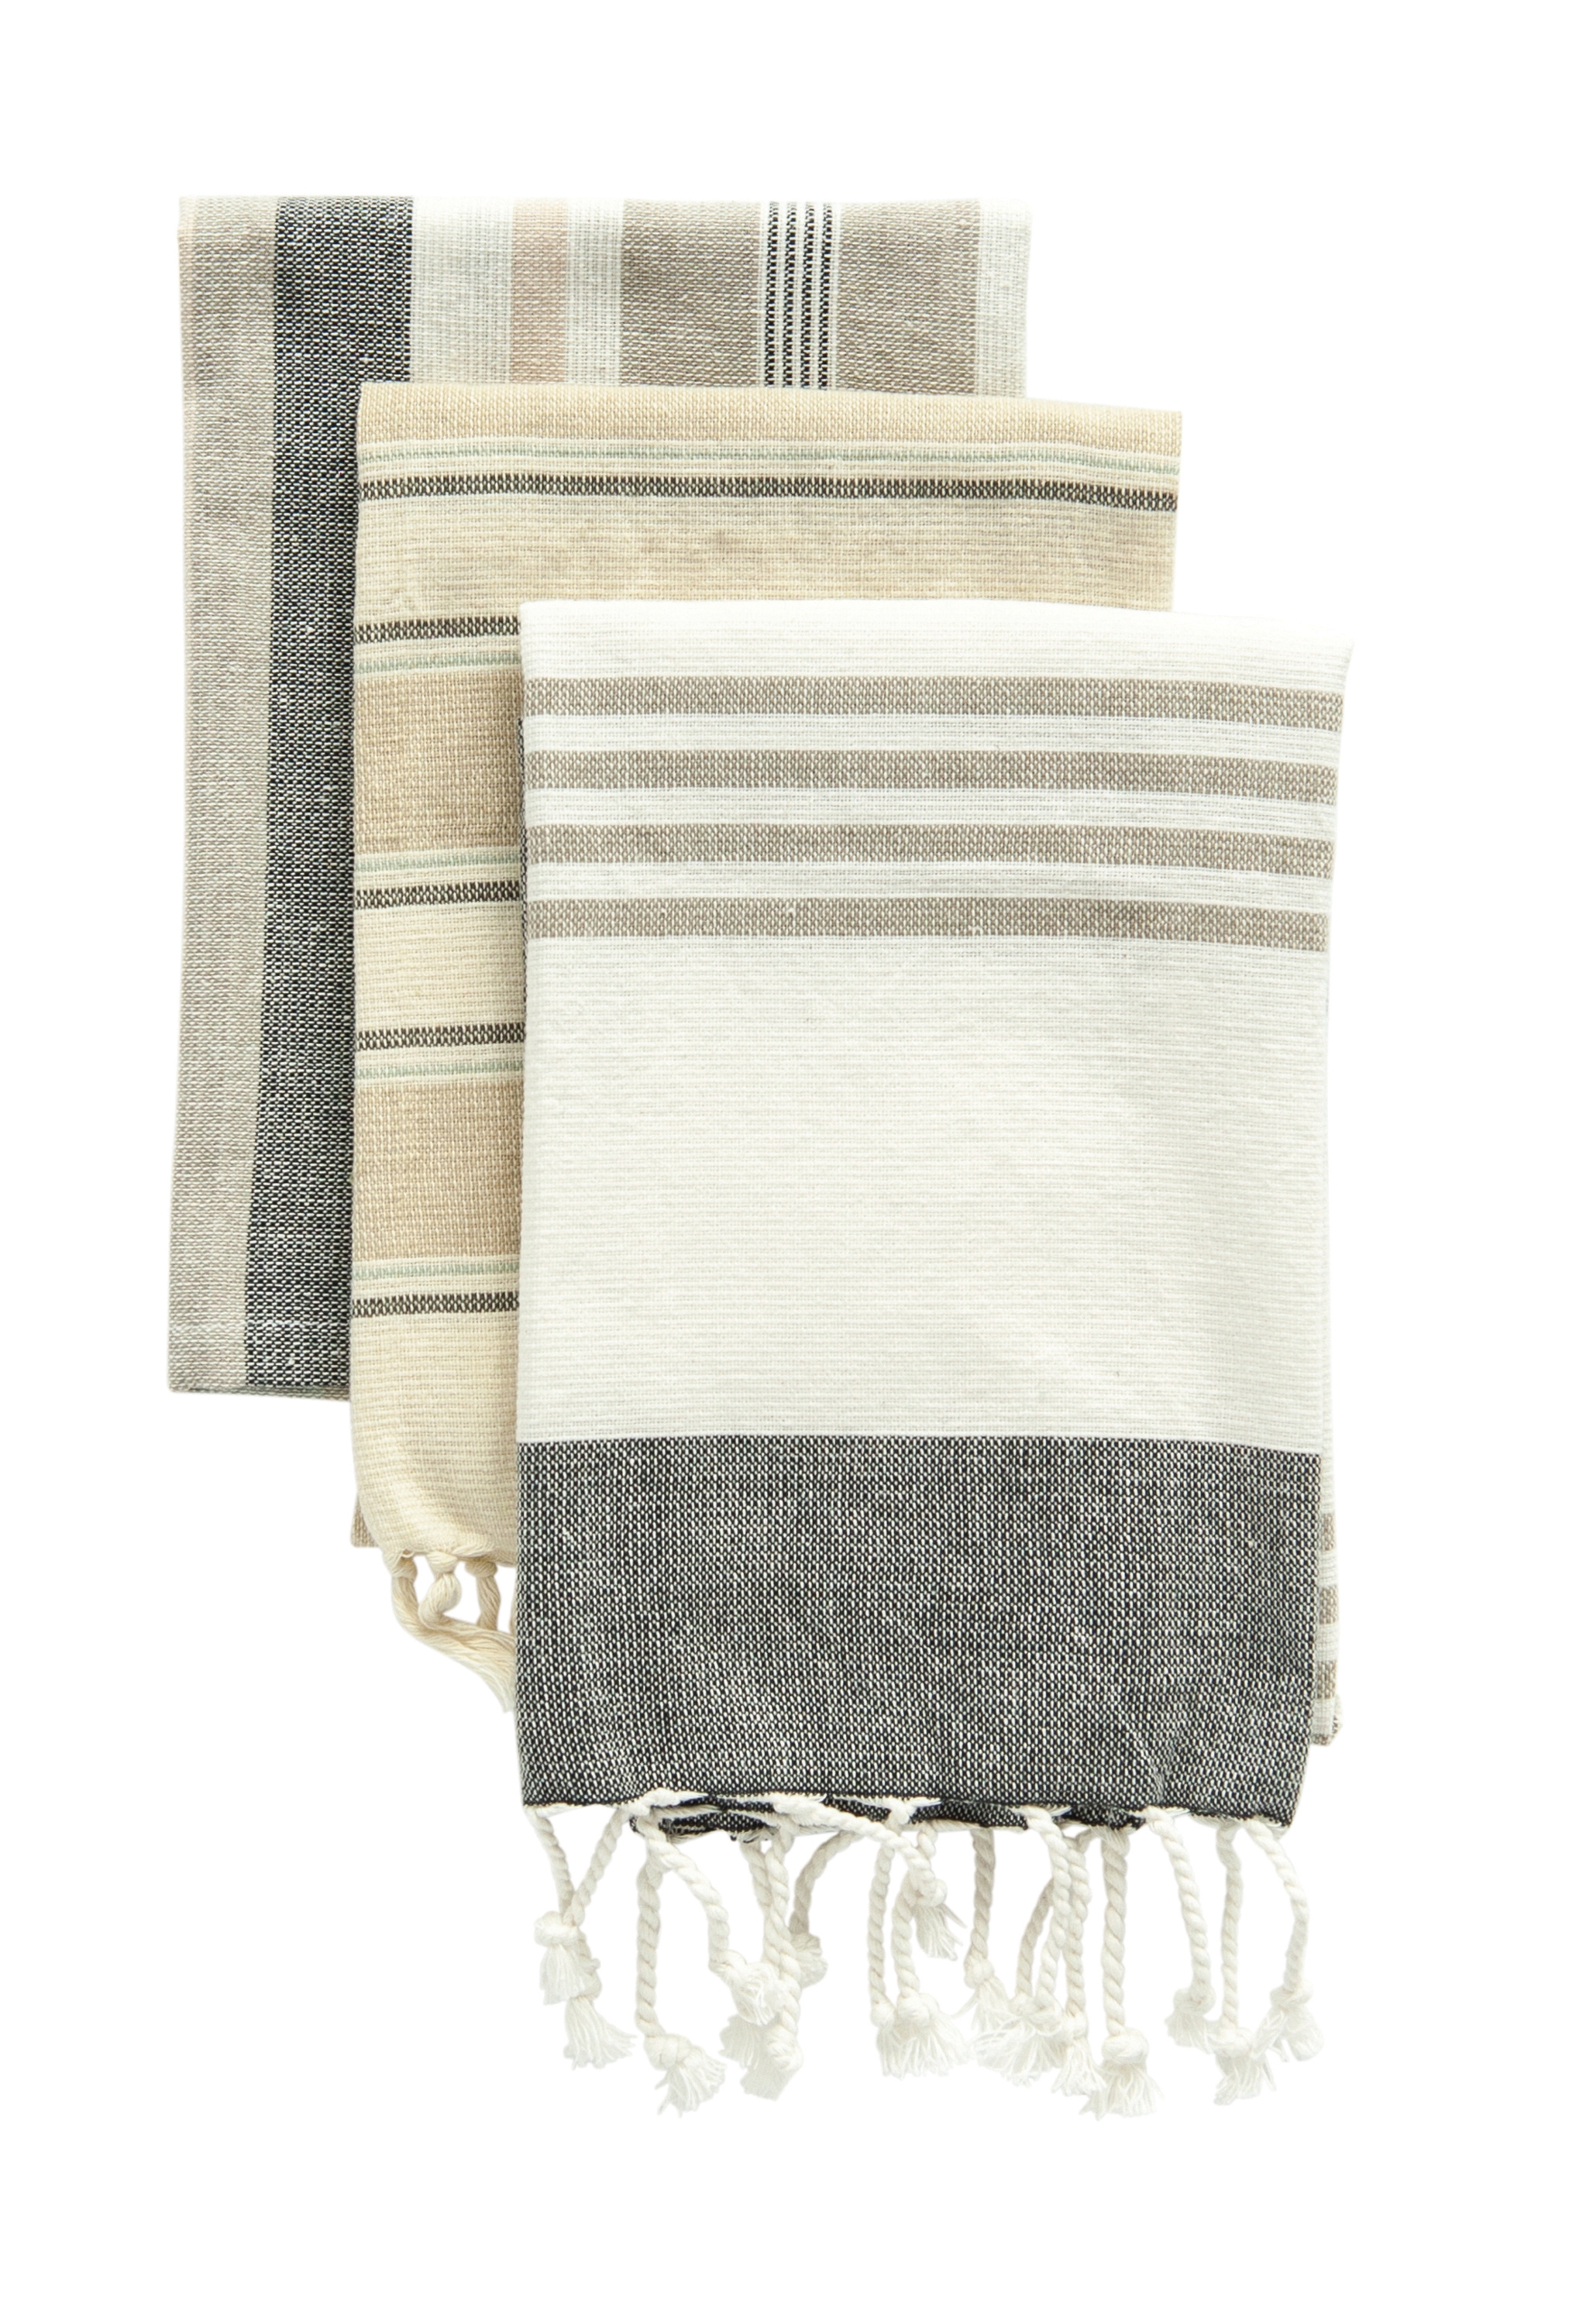 Grey & Tan Striped Cotton Tea Towels with Tassels (Set of 3) - Image 0